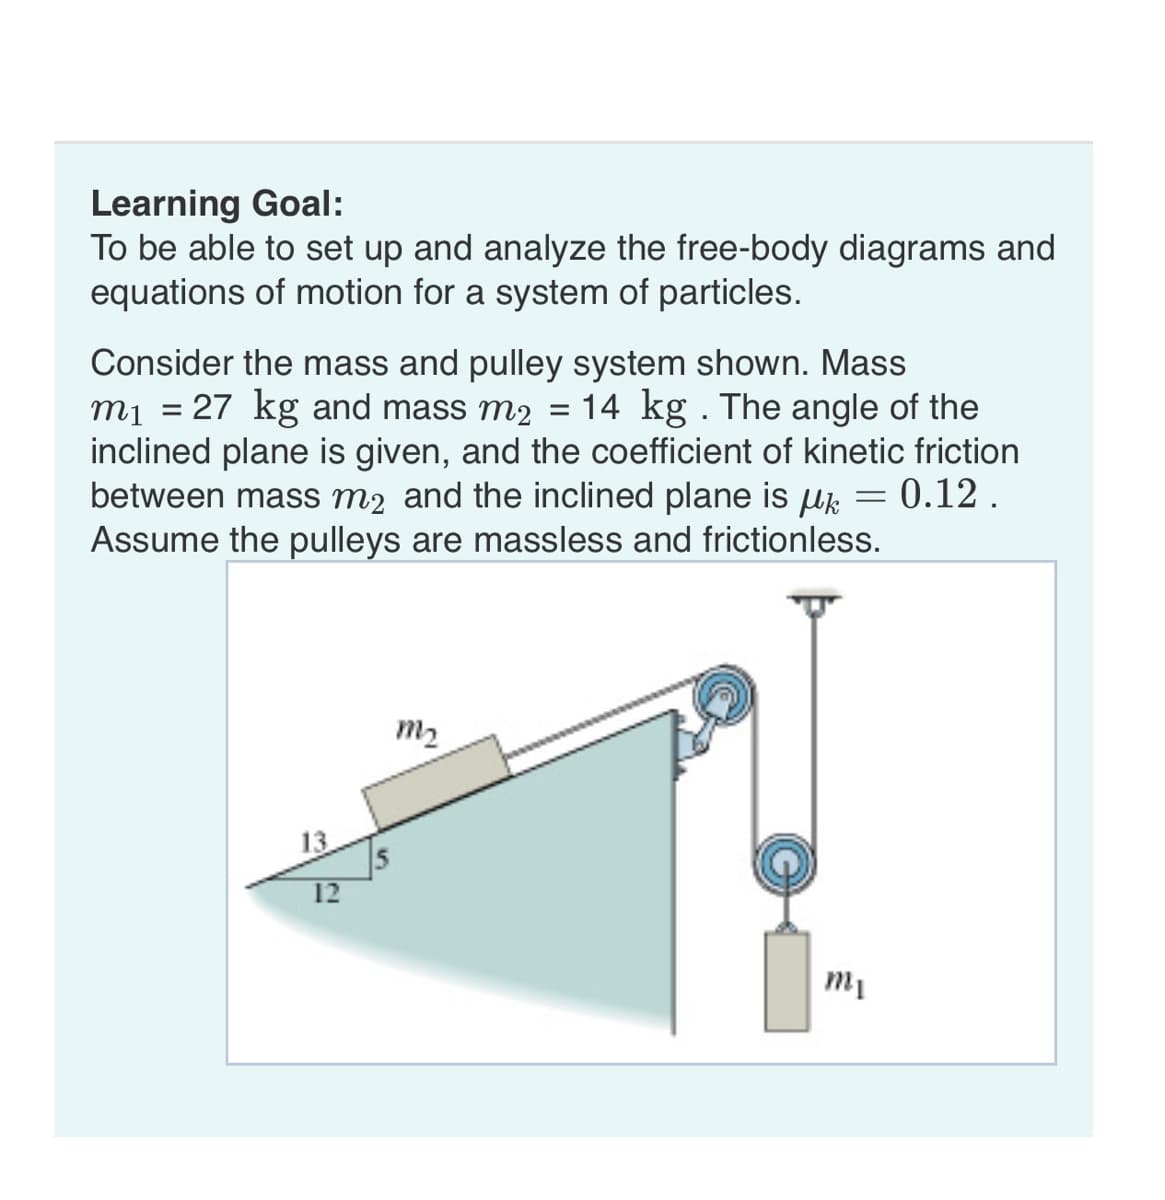 Learning Goal:
To be able to set up and analyze the free-body diagrams and
equations of motion for a system of particles.
=
Consider the mass and pulley system shown. Mass
m₁ = 27 kg and mass m2 14 kg . The angle of the
inclined plane is given, and the coefficient of kinetic friction
between mass m2 and the inclined plane is µ = 0.12.
Assume the pulleys are massless and frictionless.
13
12
m₂
mi